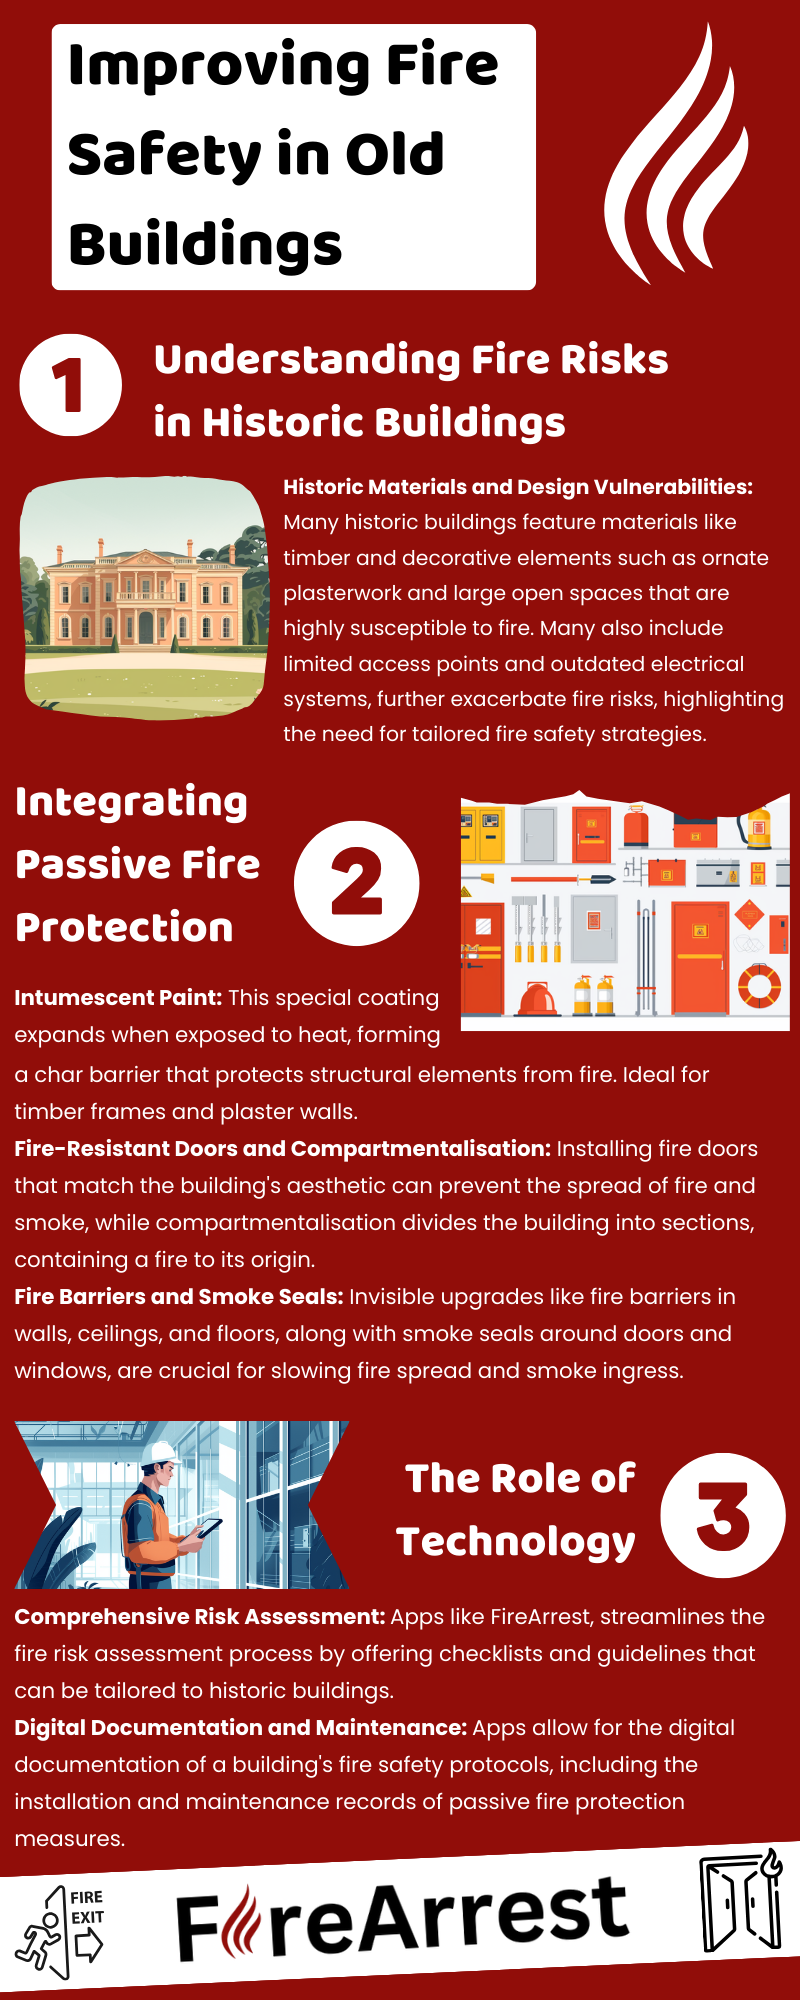 Improving Fire Safety in Old Buildings - Infographic